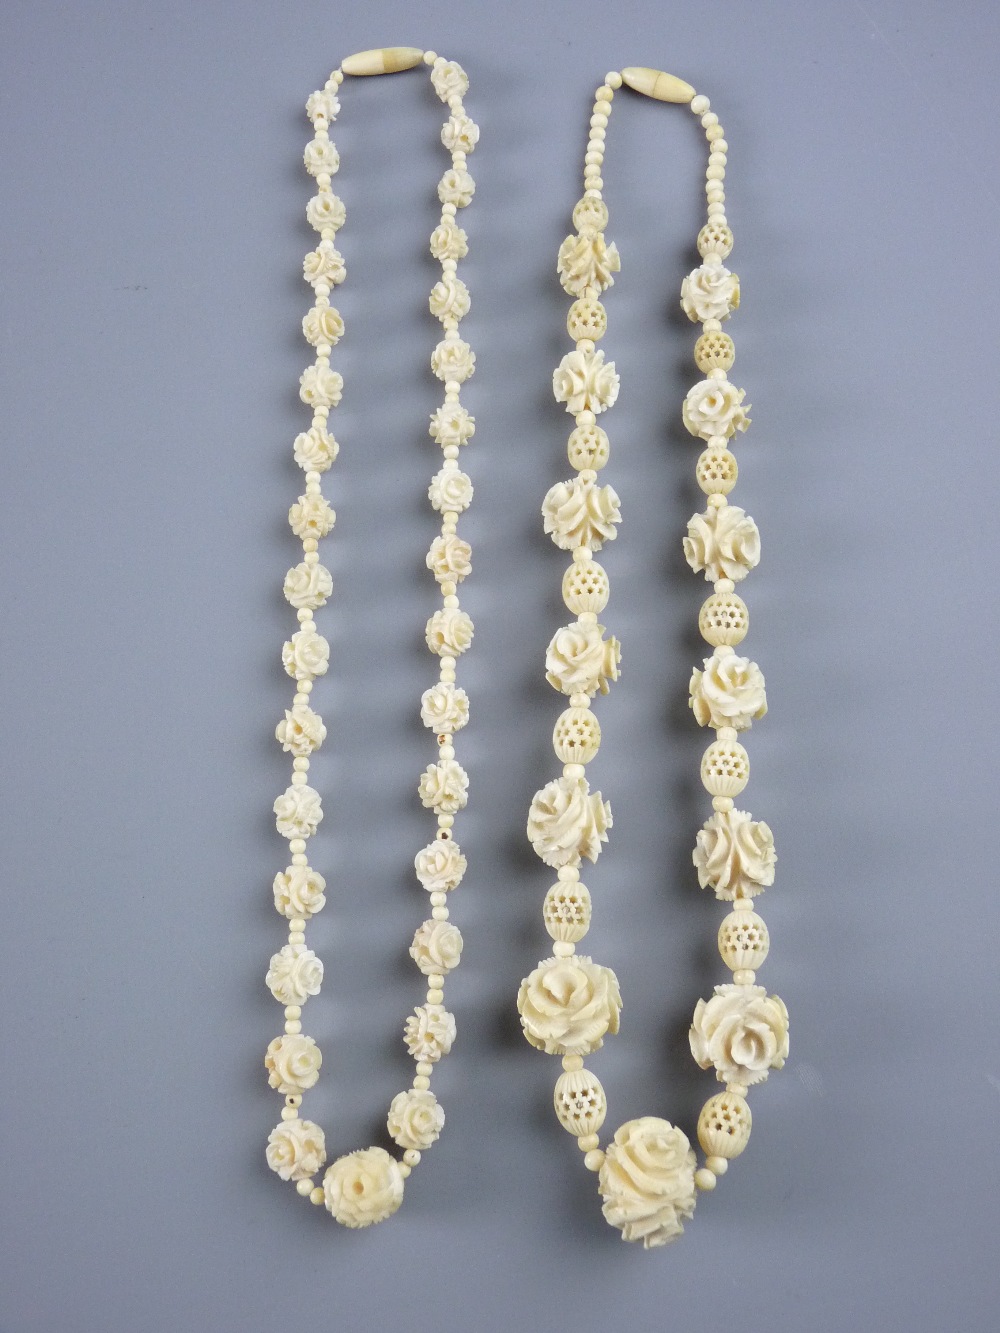 TWO CARVED IVORY BALL & FLORAL NECKLACES